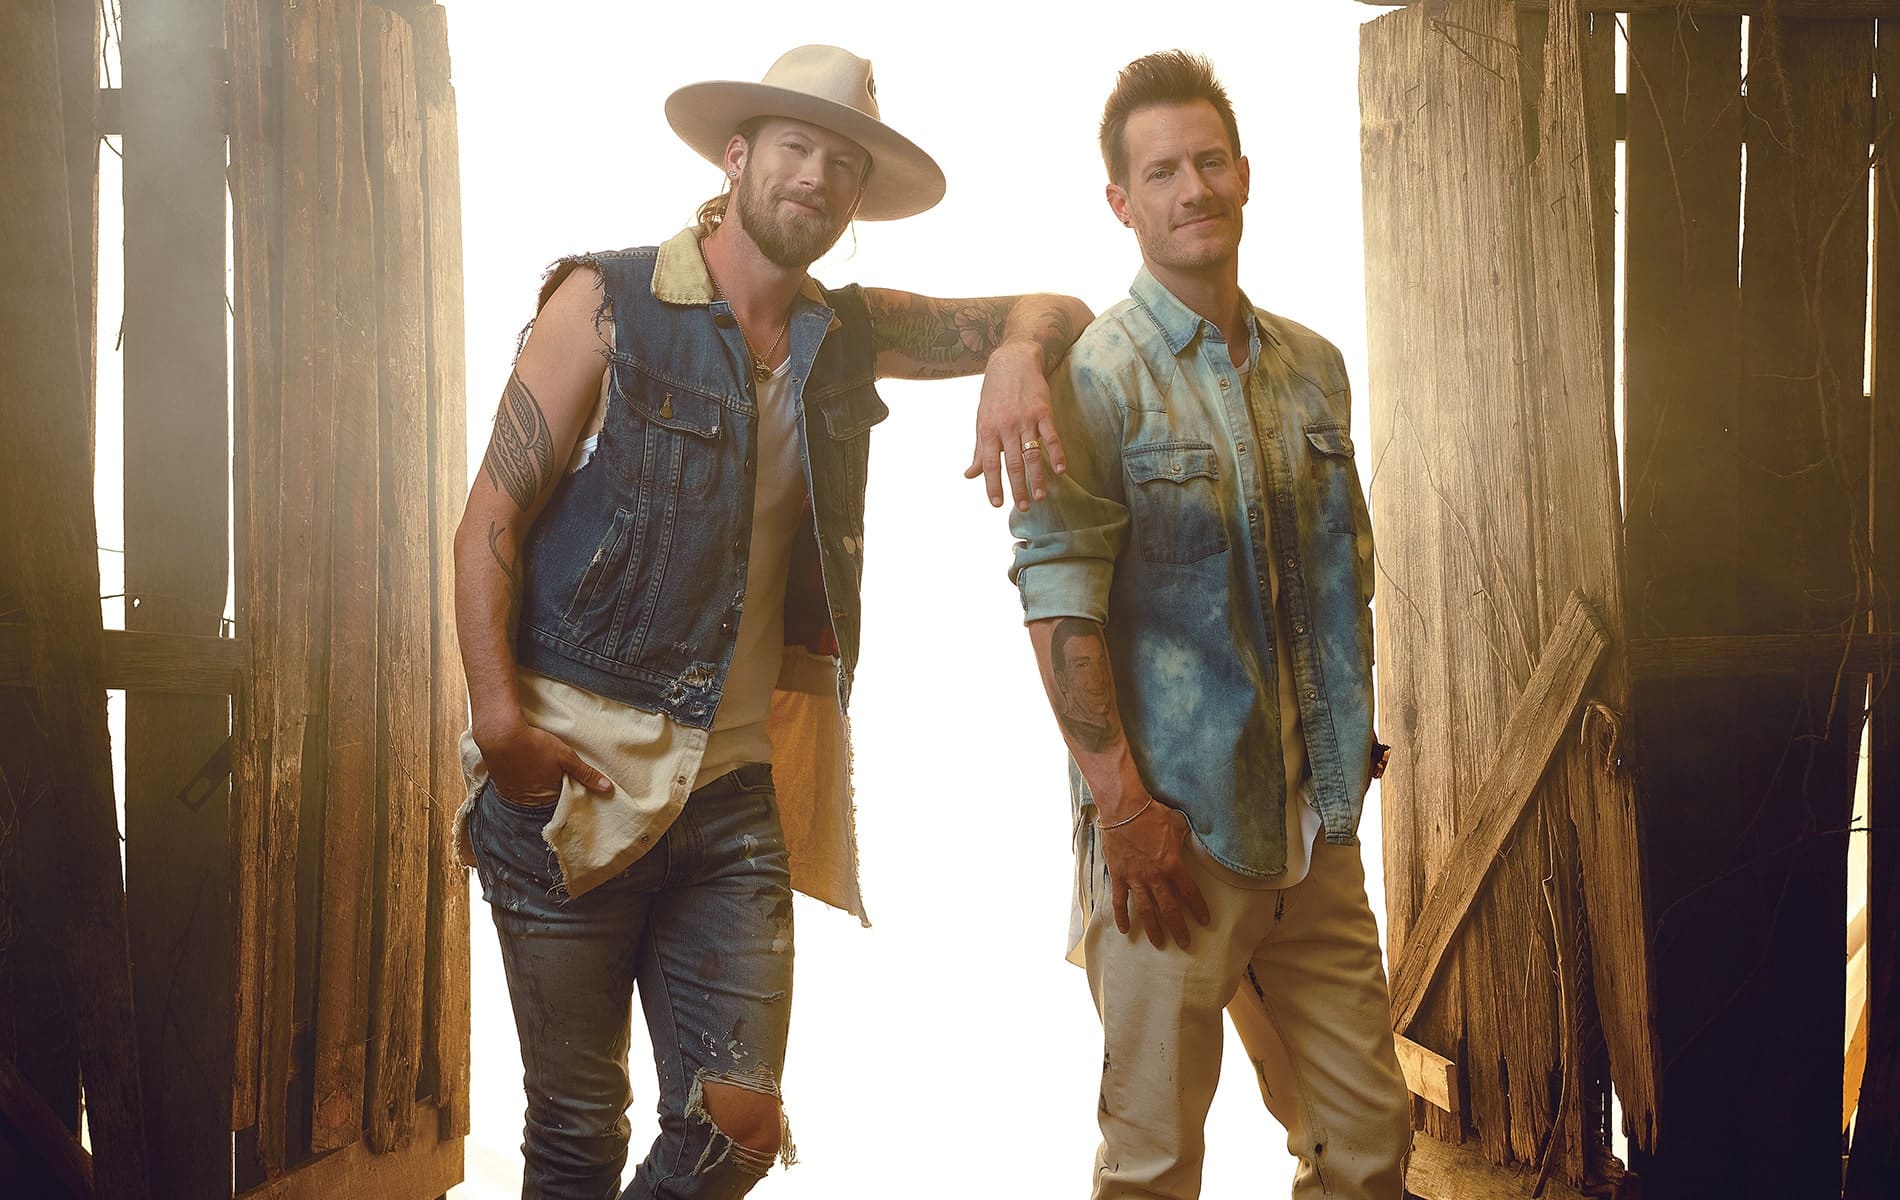 FGL’s new album, Can’t Say I Ain’t Country, will be released on February 15, 2019.